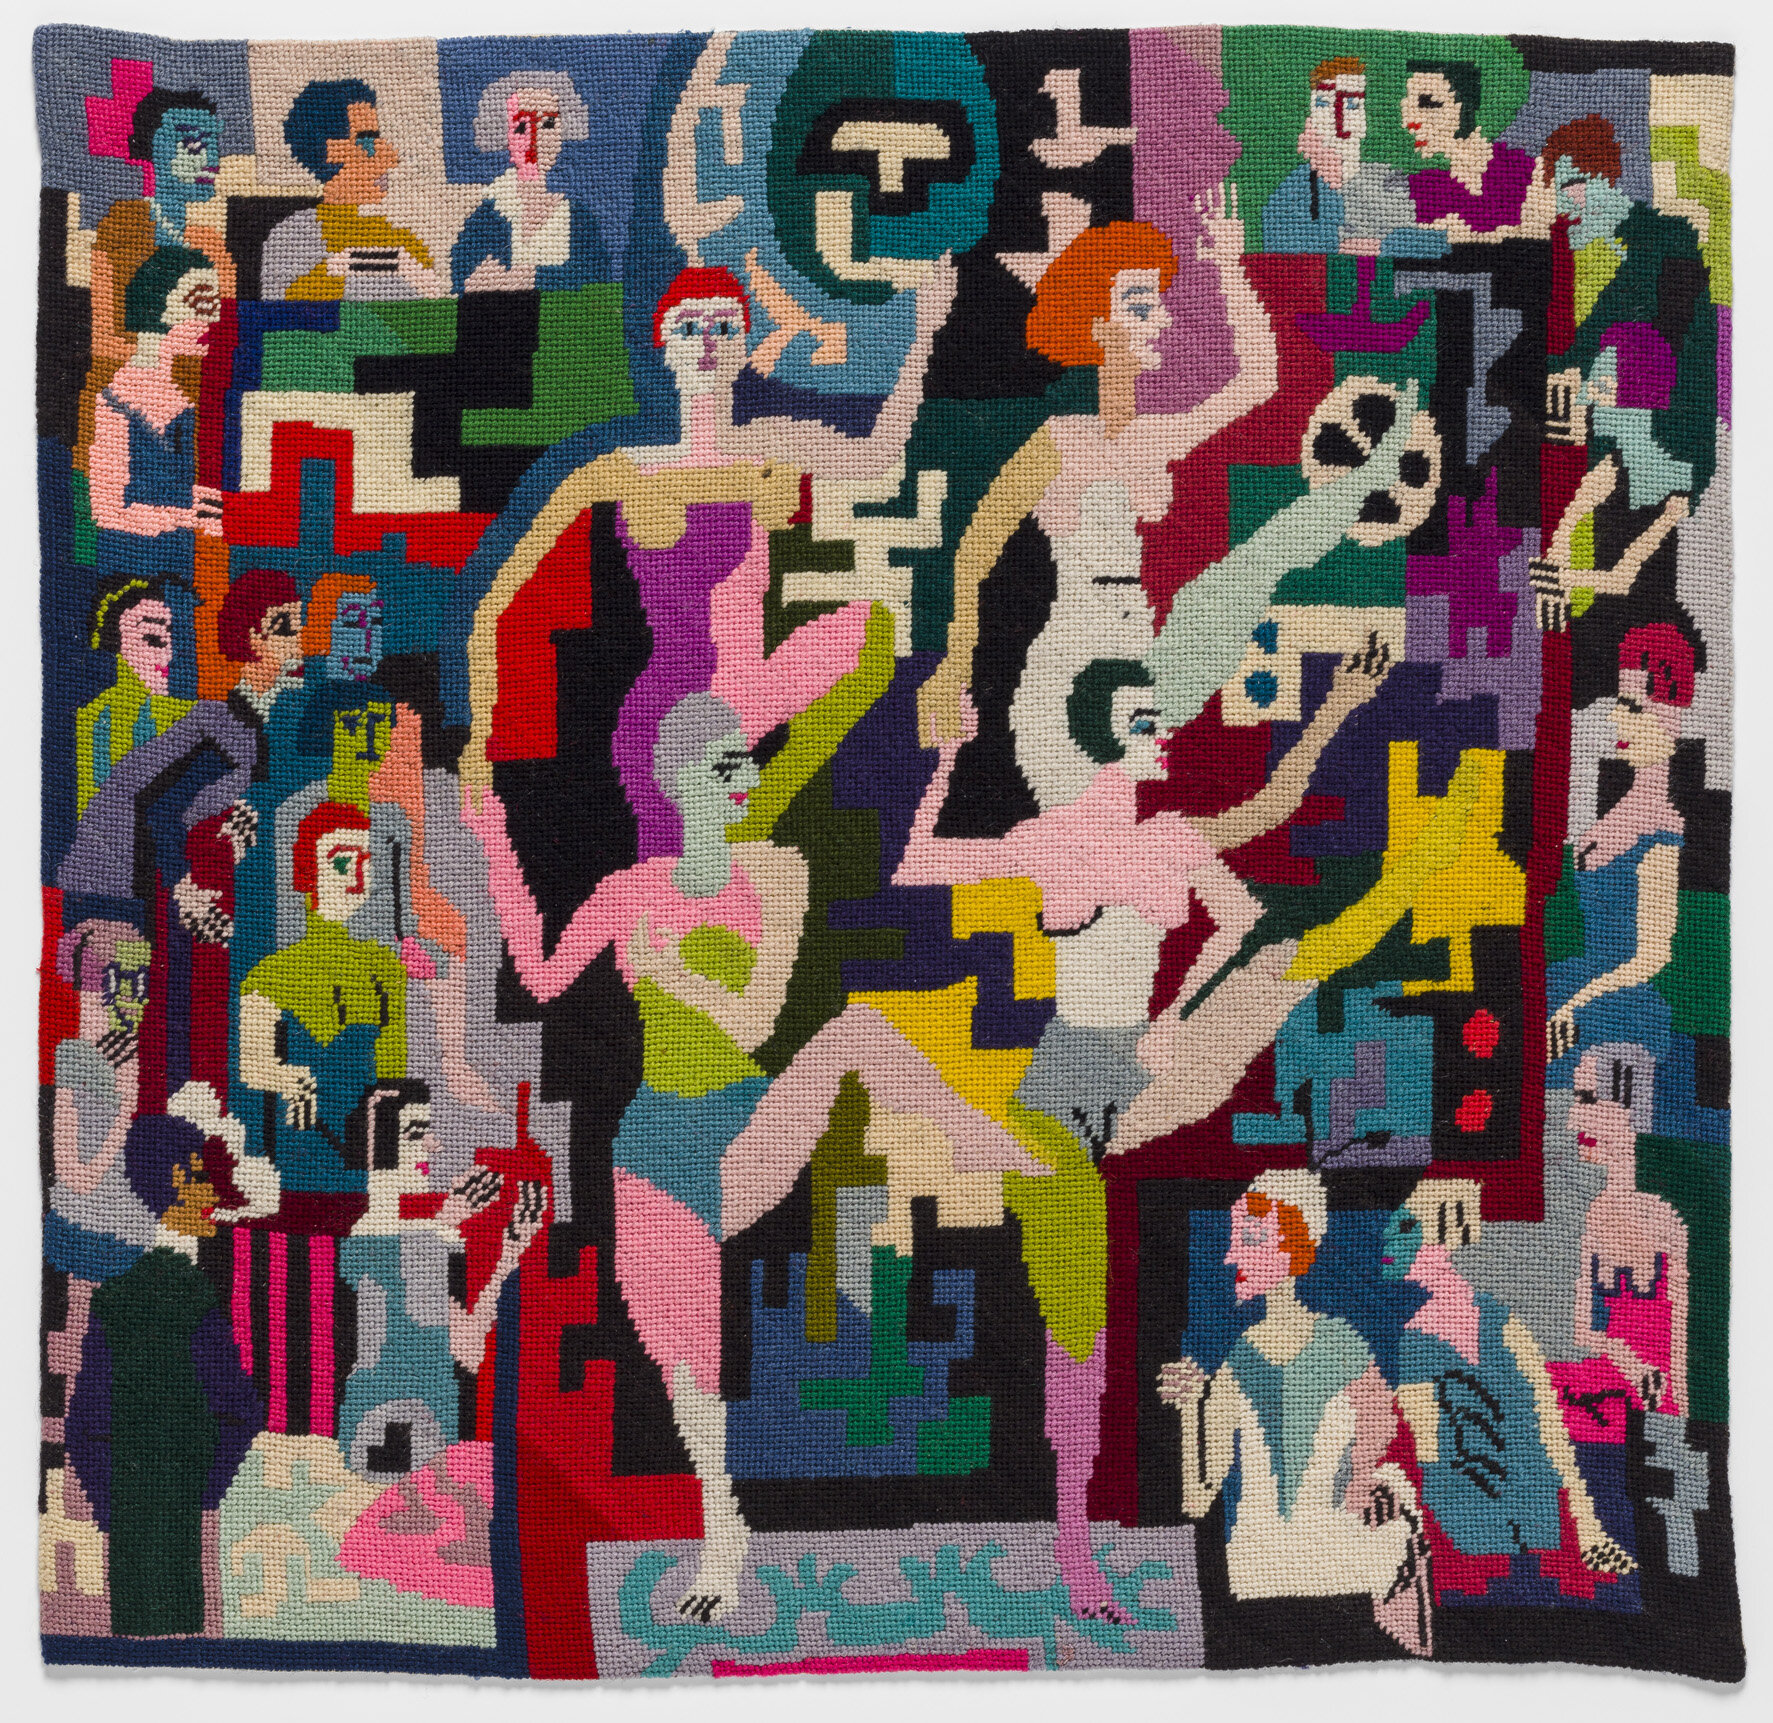 Ernst Ludwig Kirchner (design) and Else Bosshard-Forrer (execution), Dance, 1922-24, cotton, wool; petit point embroidery on canvas.